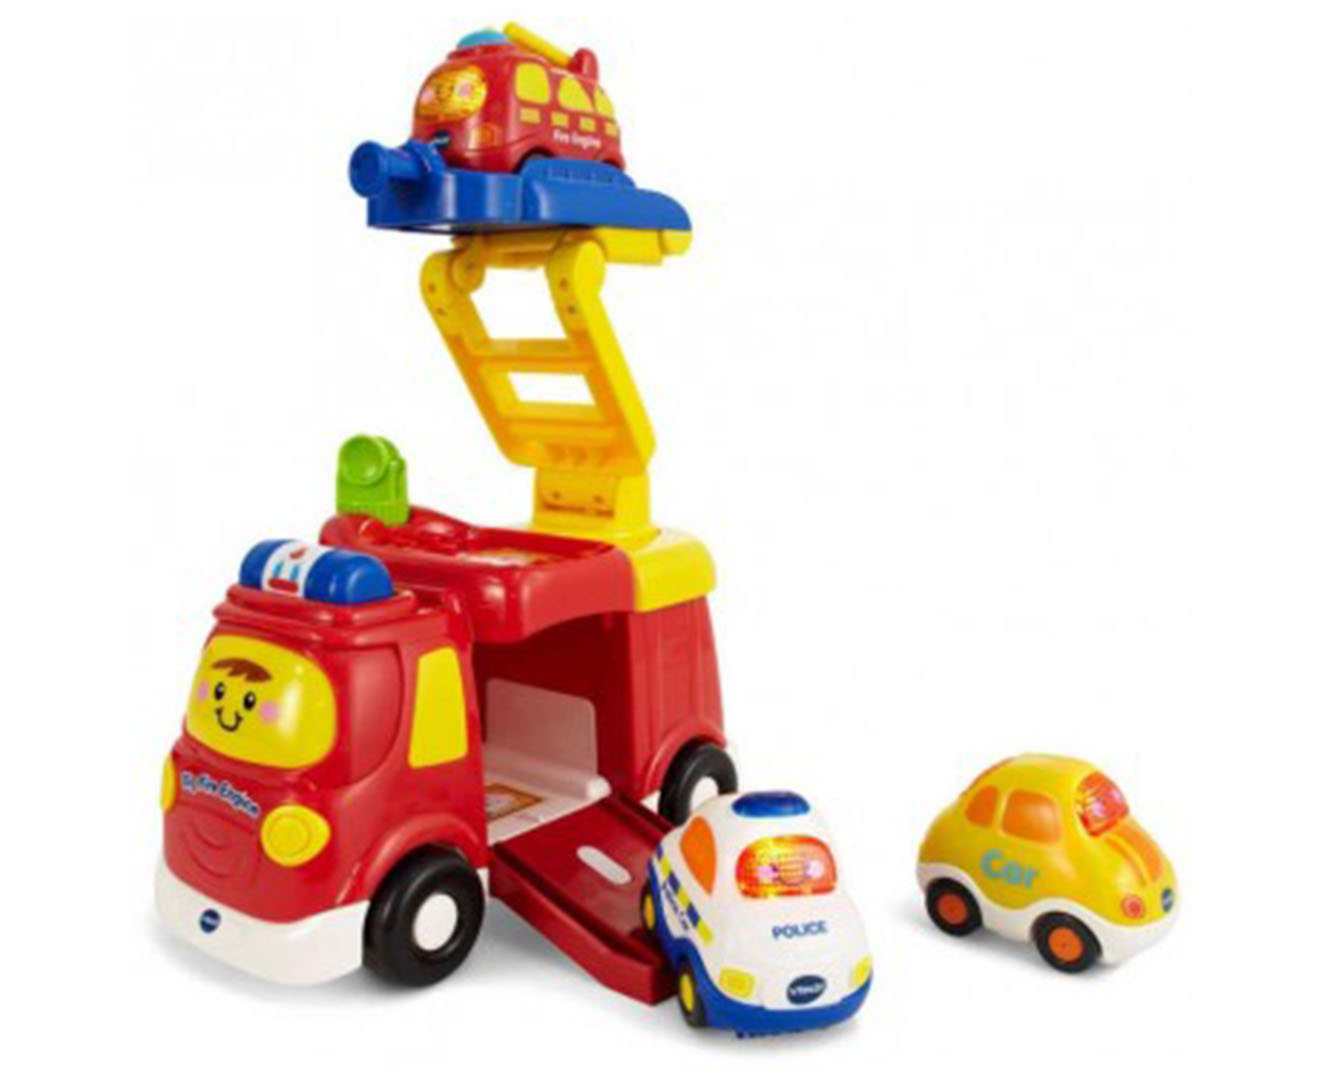 toot toot drivers big fire engine